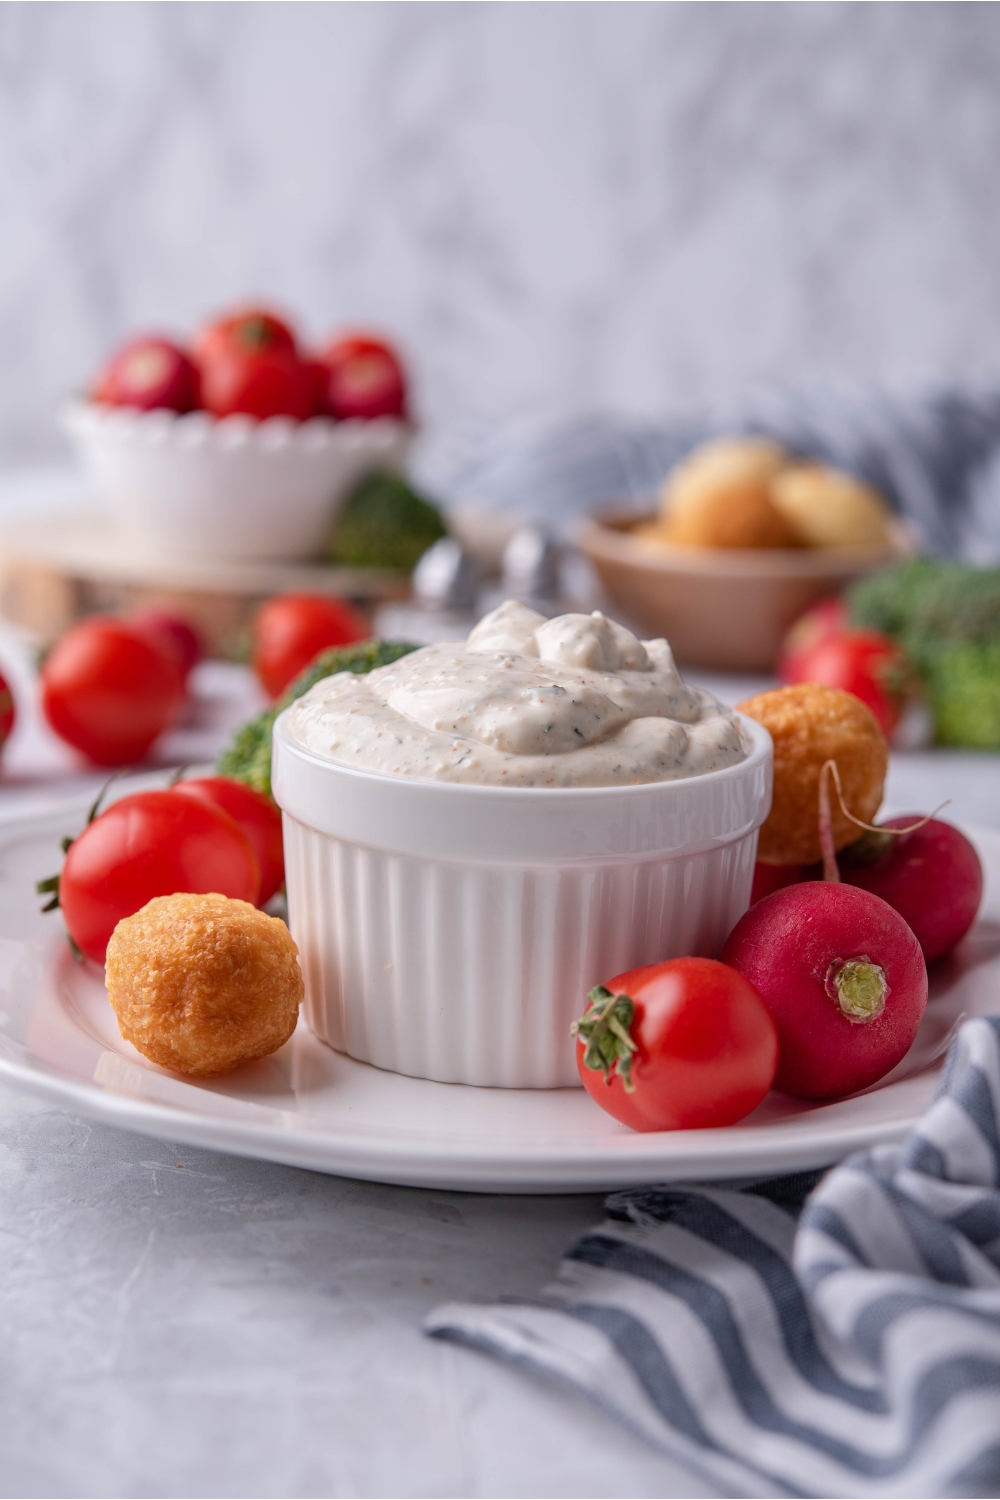 Vegetable dip in a white ramekin atop a white plate that is filled with cherry tomatoes and nuggets. In the background are bowls of tomatoes, nuggets, and fresh vegetables.